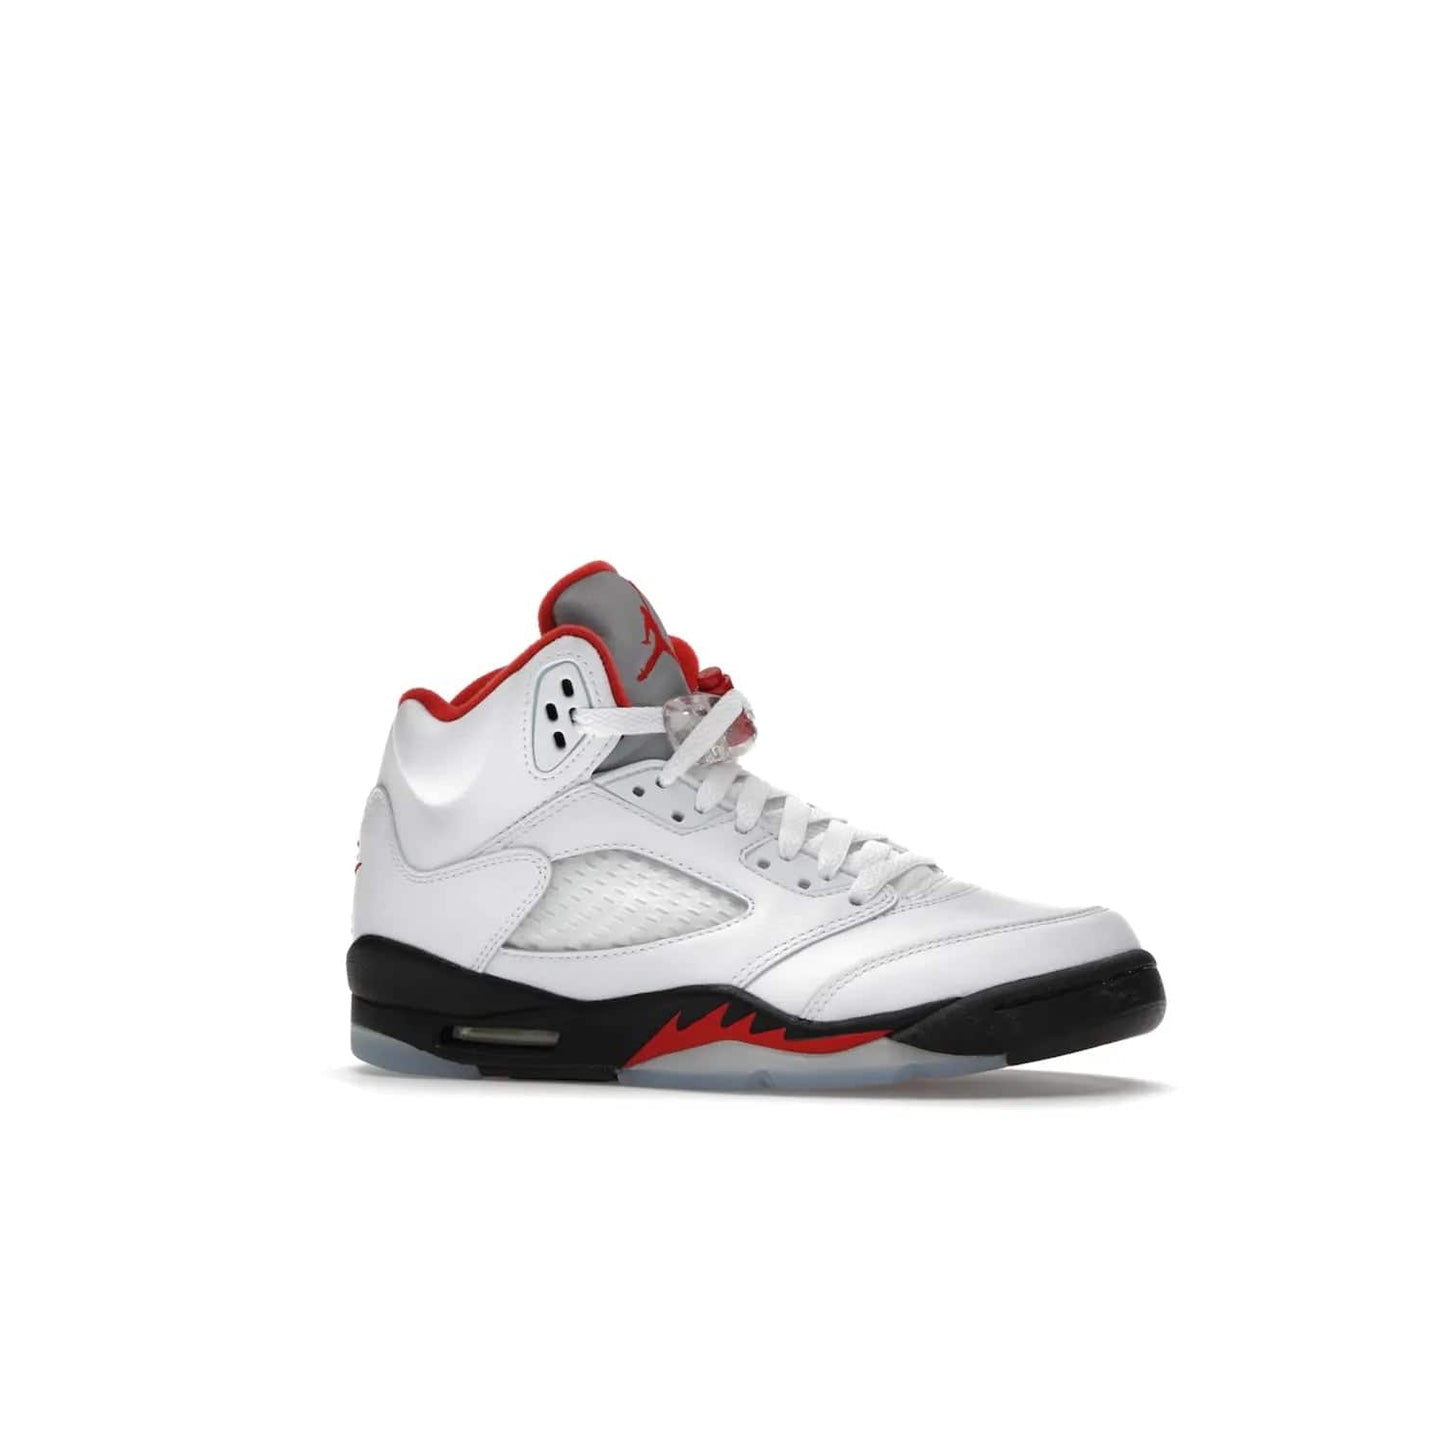 Jordan 5 Retro Fire Red Silver Tongue (2020) (GS) - Image 3 - Only at www.BallersClubKickz.com - A stylish option for any grade schooler. The Air Jordan 5 Retro Fire Red Silver Tongue 2020 GS features a combination of four hues, premium white leather, a clear mesh mid-upper and a reflective silver tongue. An icy translucent blue outsole completes the look. Available on May 2, $150.